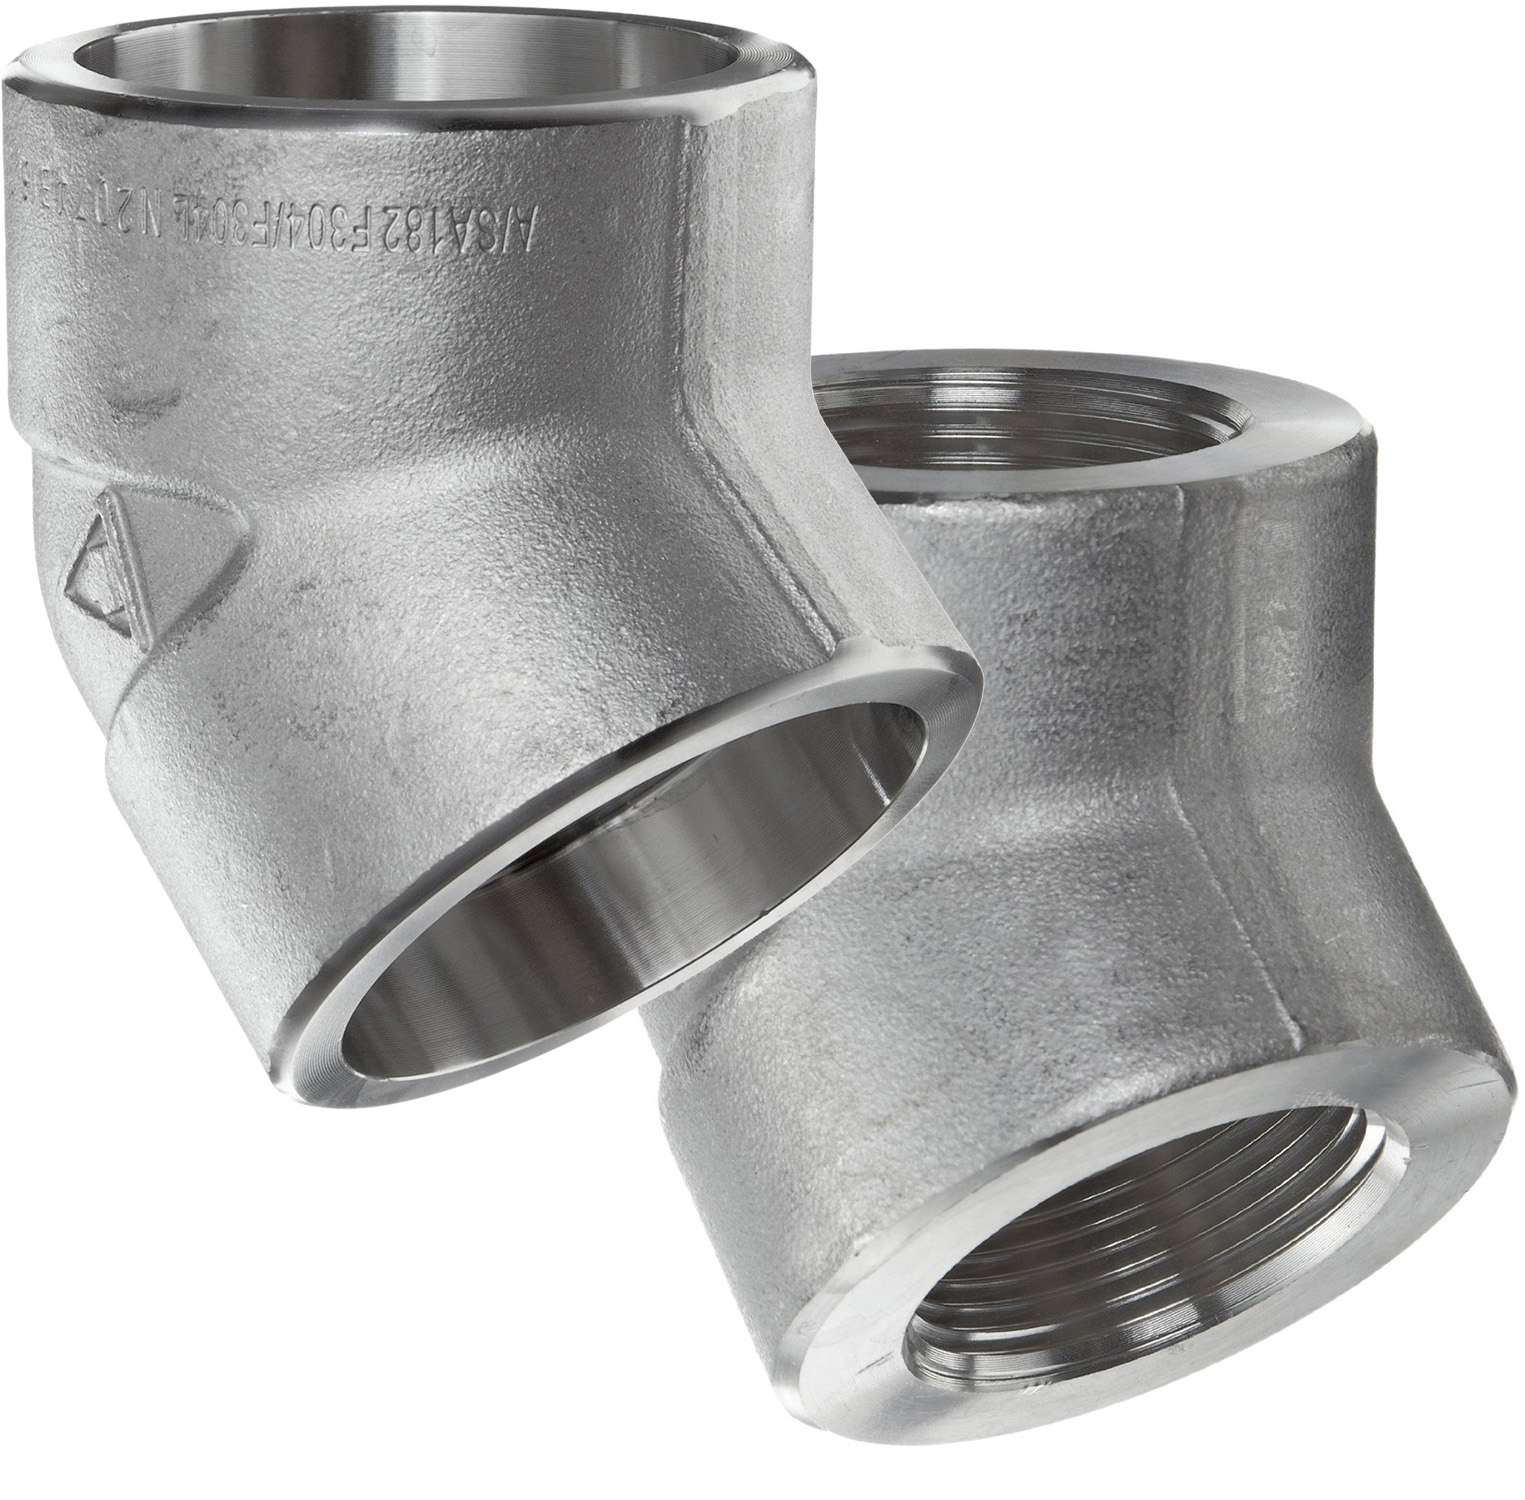 Nor-Cal  Elbow 22.5 degrees Weld fitting 3 inch                      940308-6 